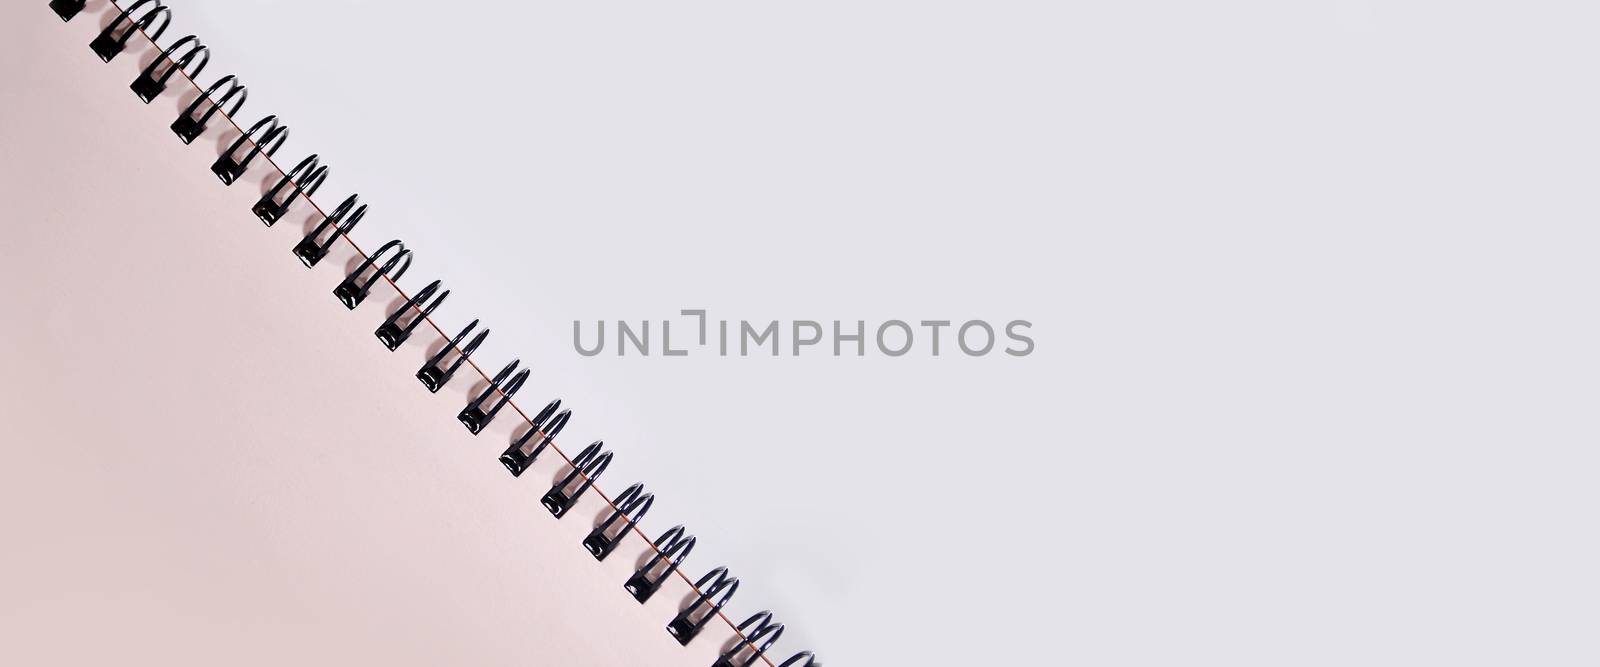 Blank notebook background space for advertising text.